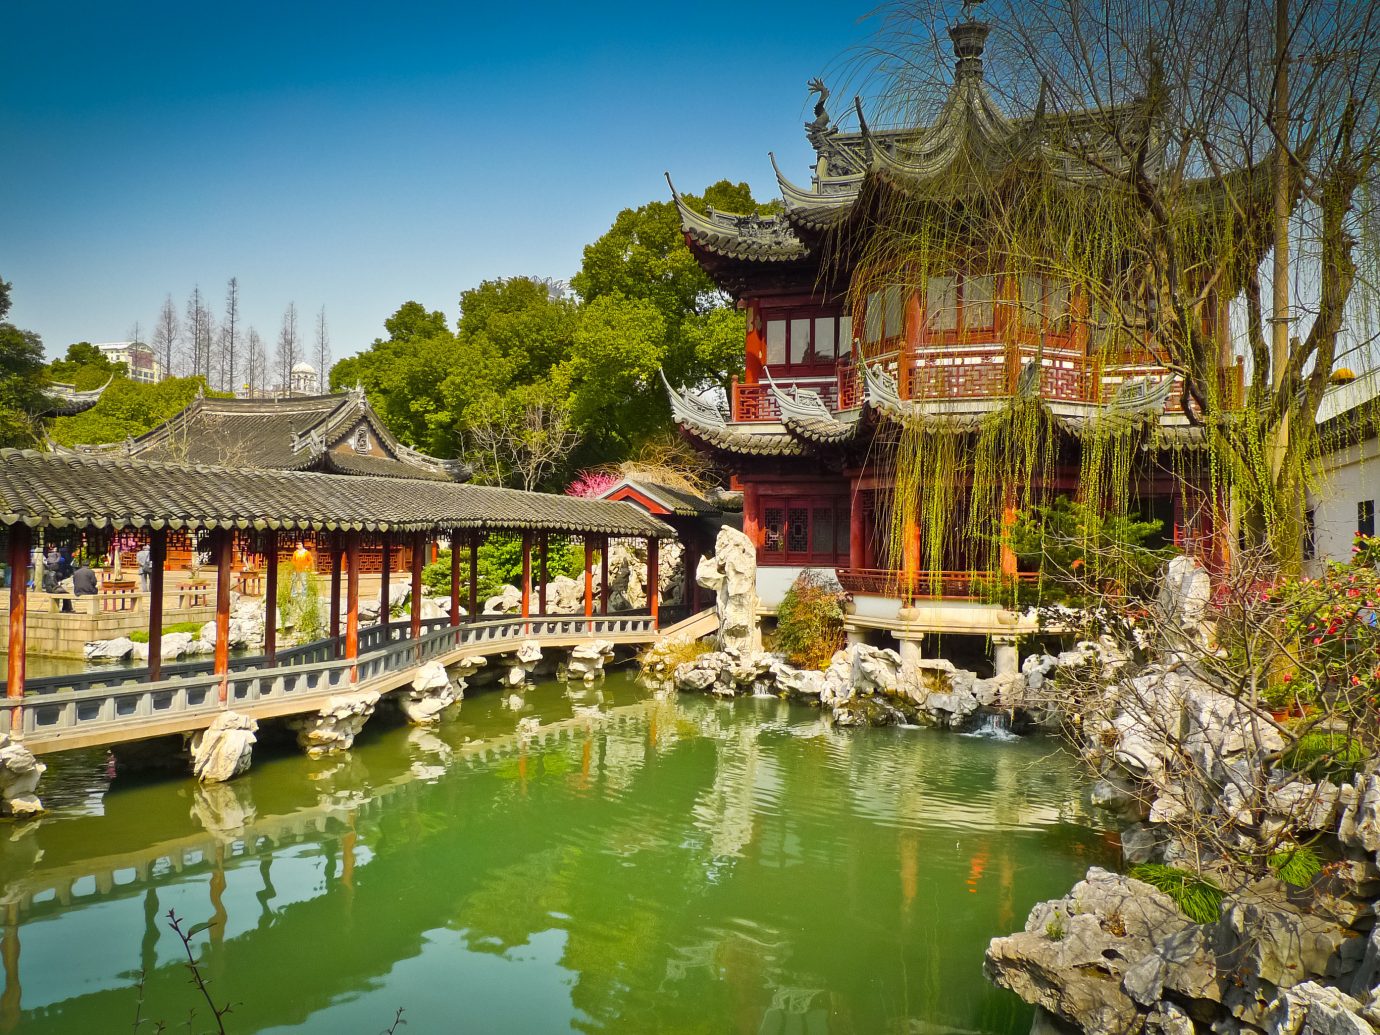 China china rose Shanghai Travel Tips Trip Ideas reflection water Nature plant waterway tree tourist attraction leisure sky tourism pond City real estate Resort landscape Garden flower chinese architecture watercourse